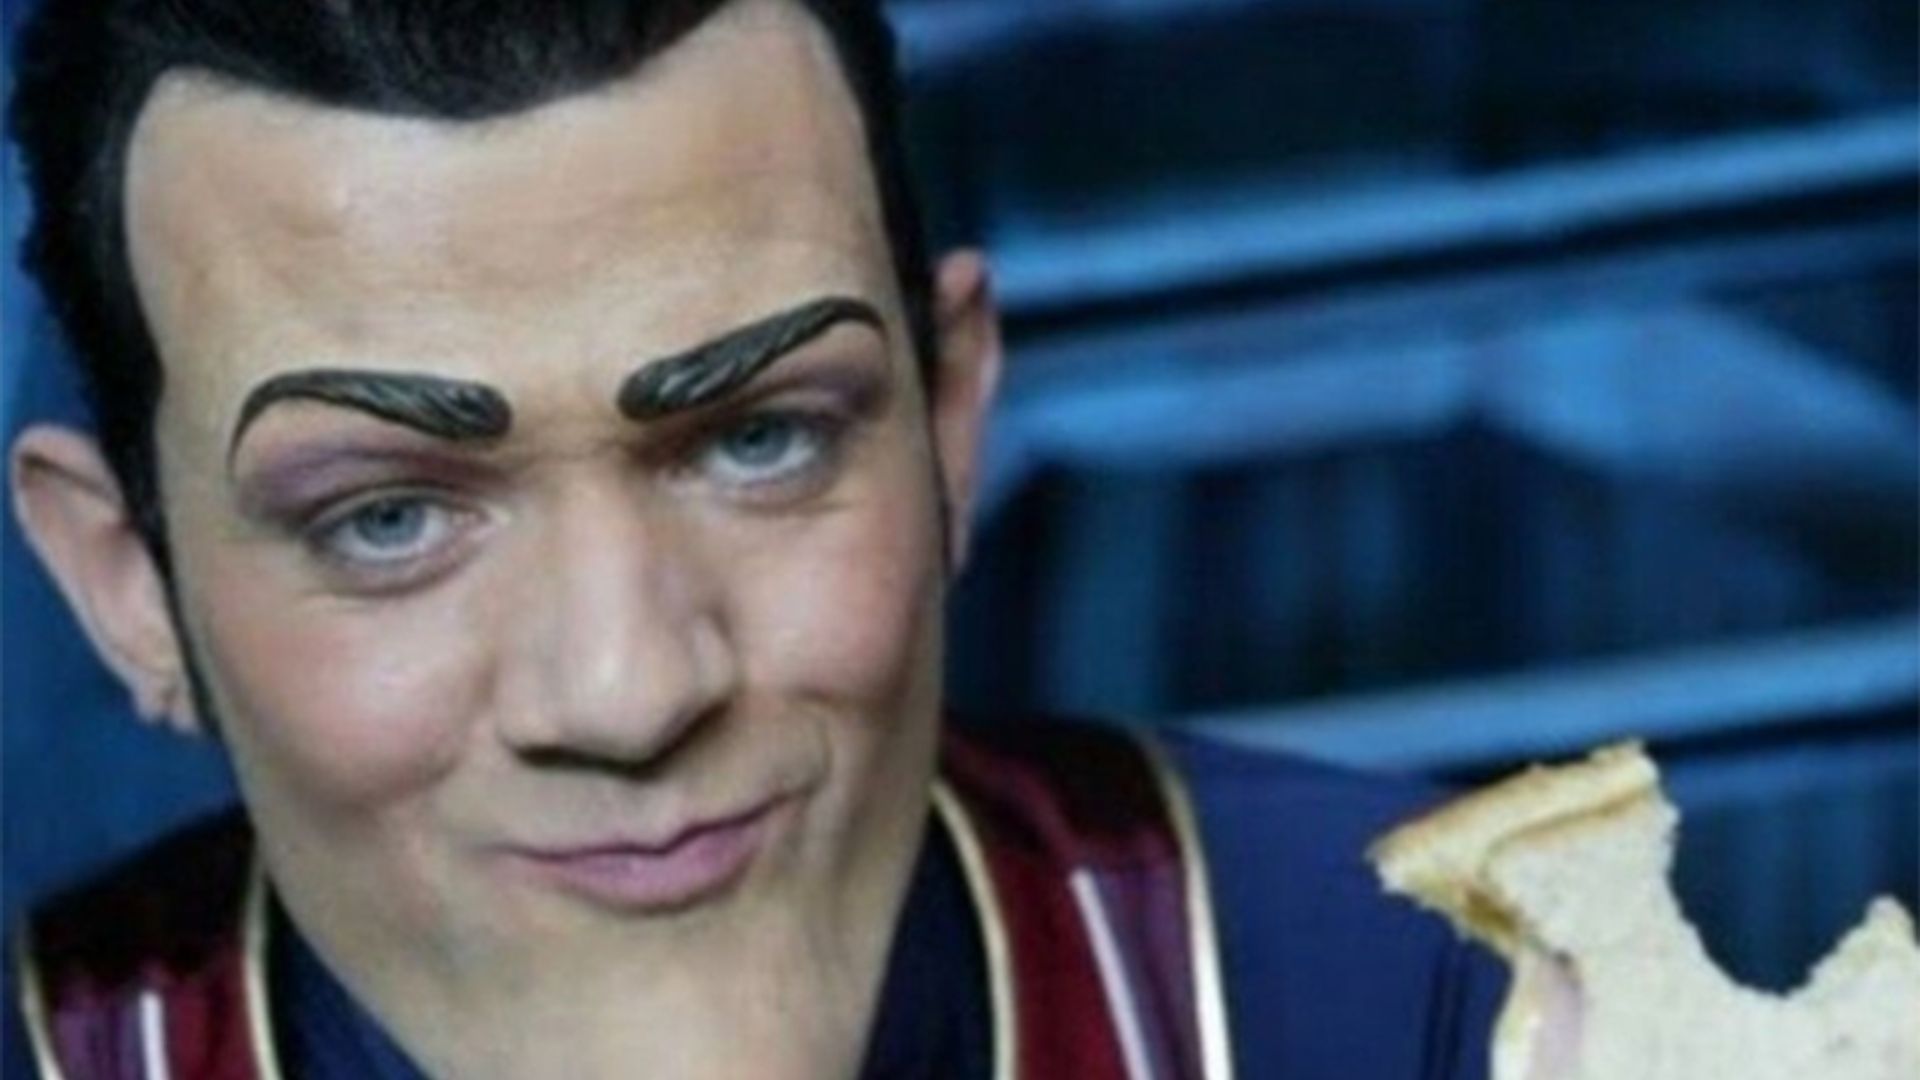 LazyTown's Robbie Rotten thanks fans for support following terminal cancer revelation